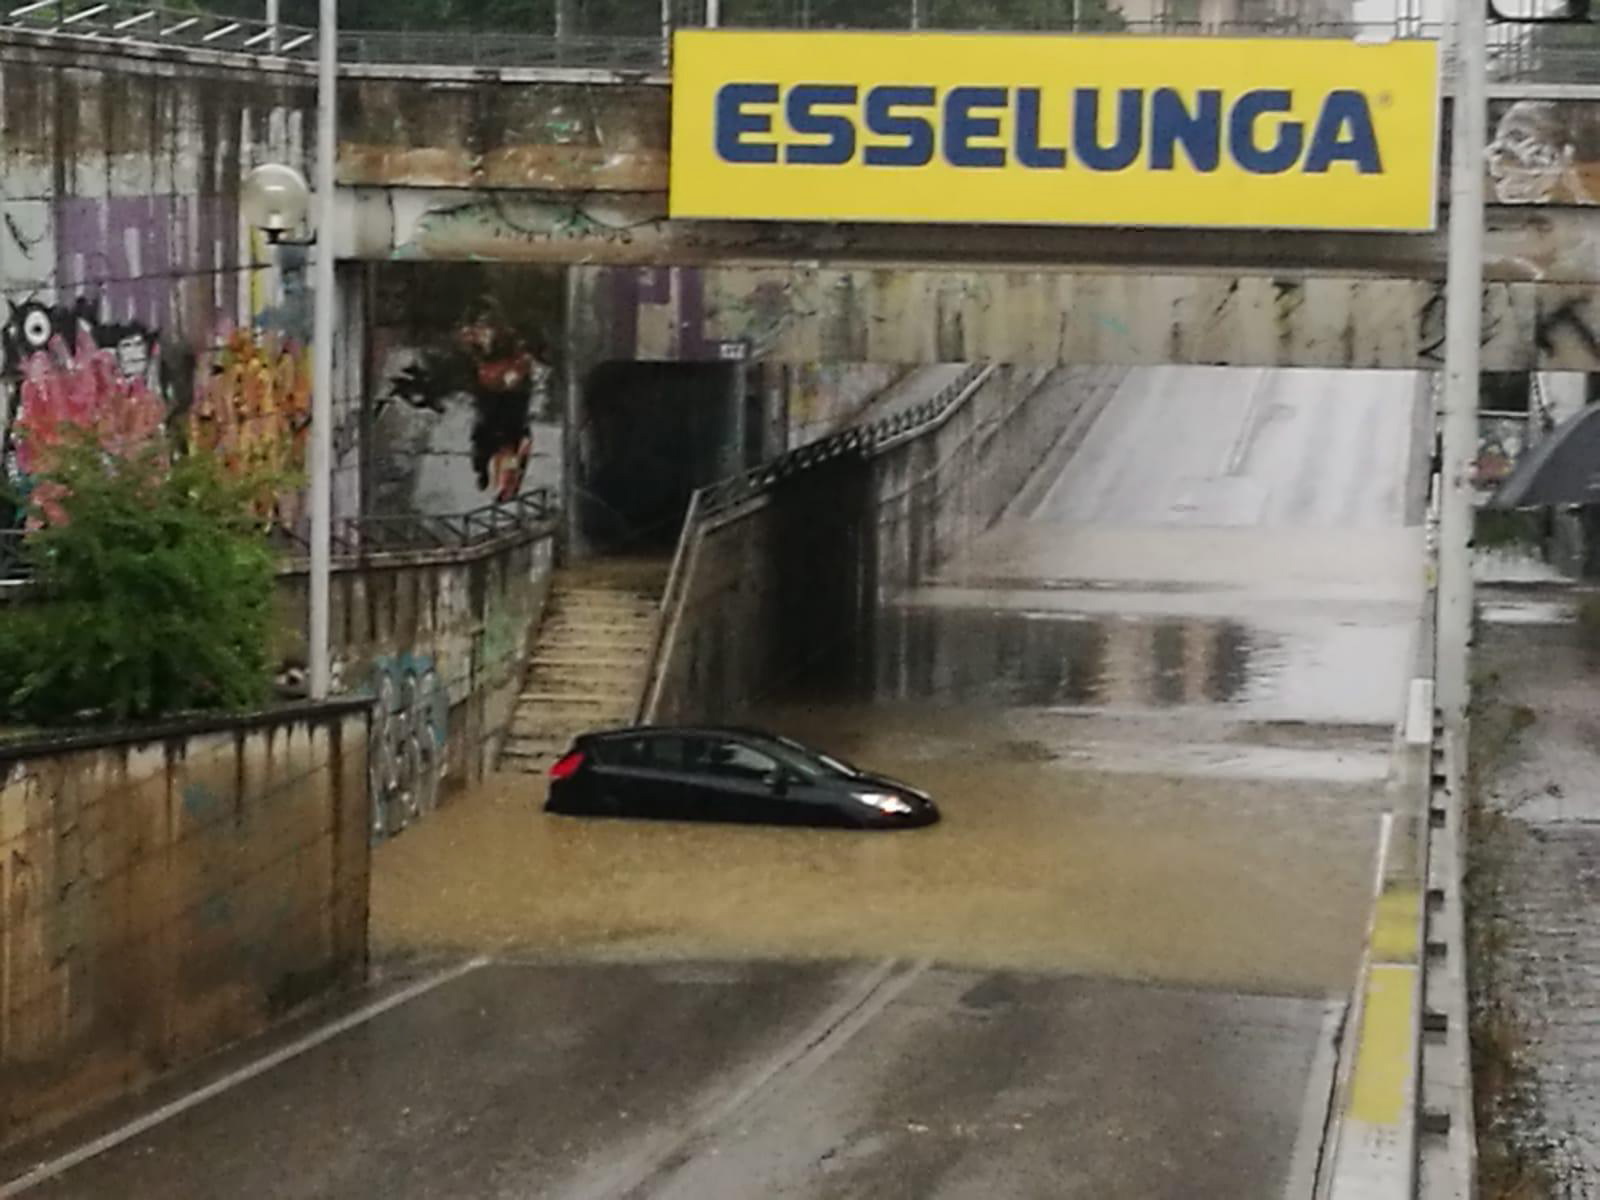 epa07745837 A car stands in a flooded underpass following violent storms that hit Arezzo, Tuscany region, Italy, 28 July 2019.  EPA/ALESSANDRO FALSETTI